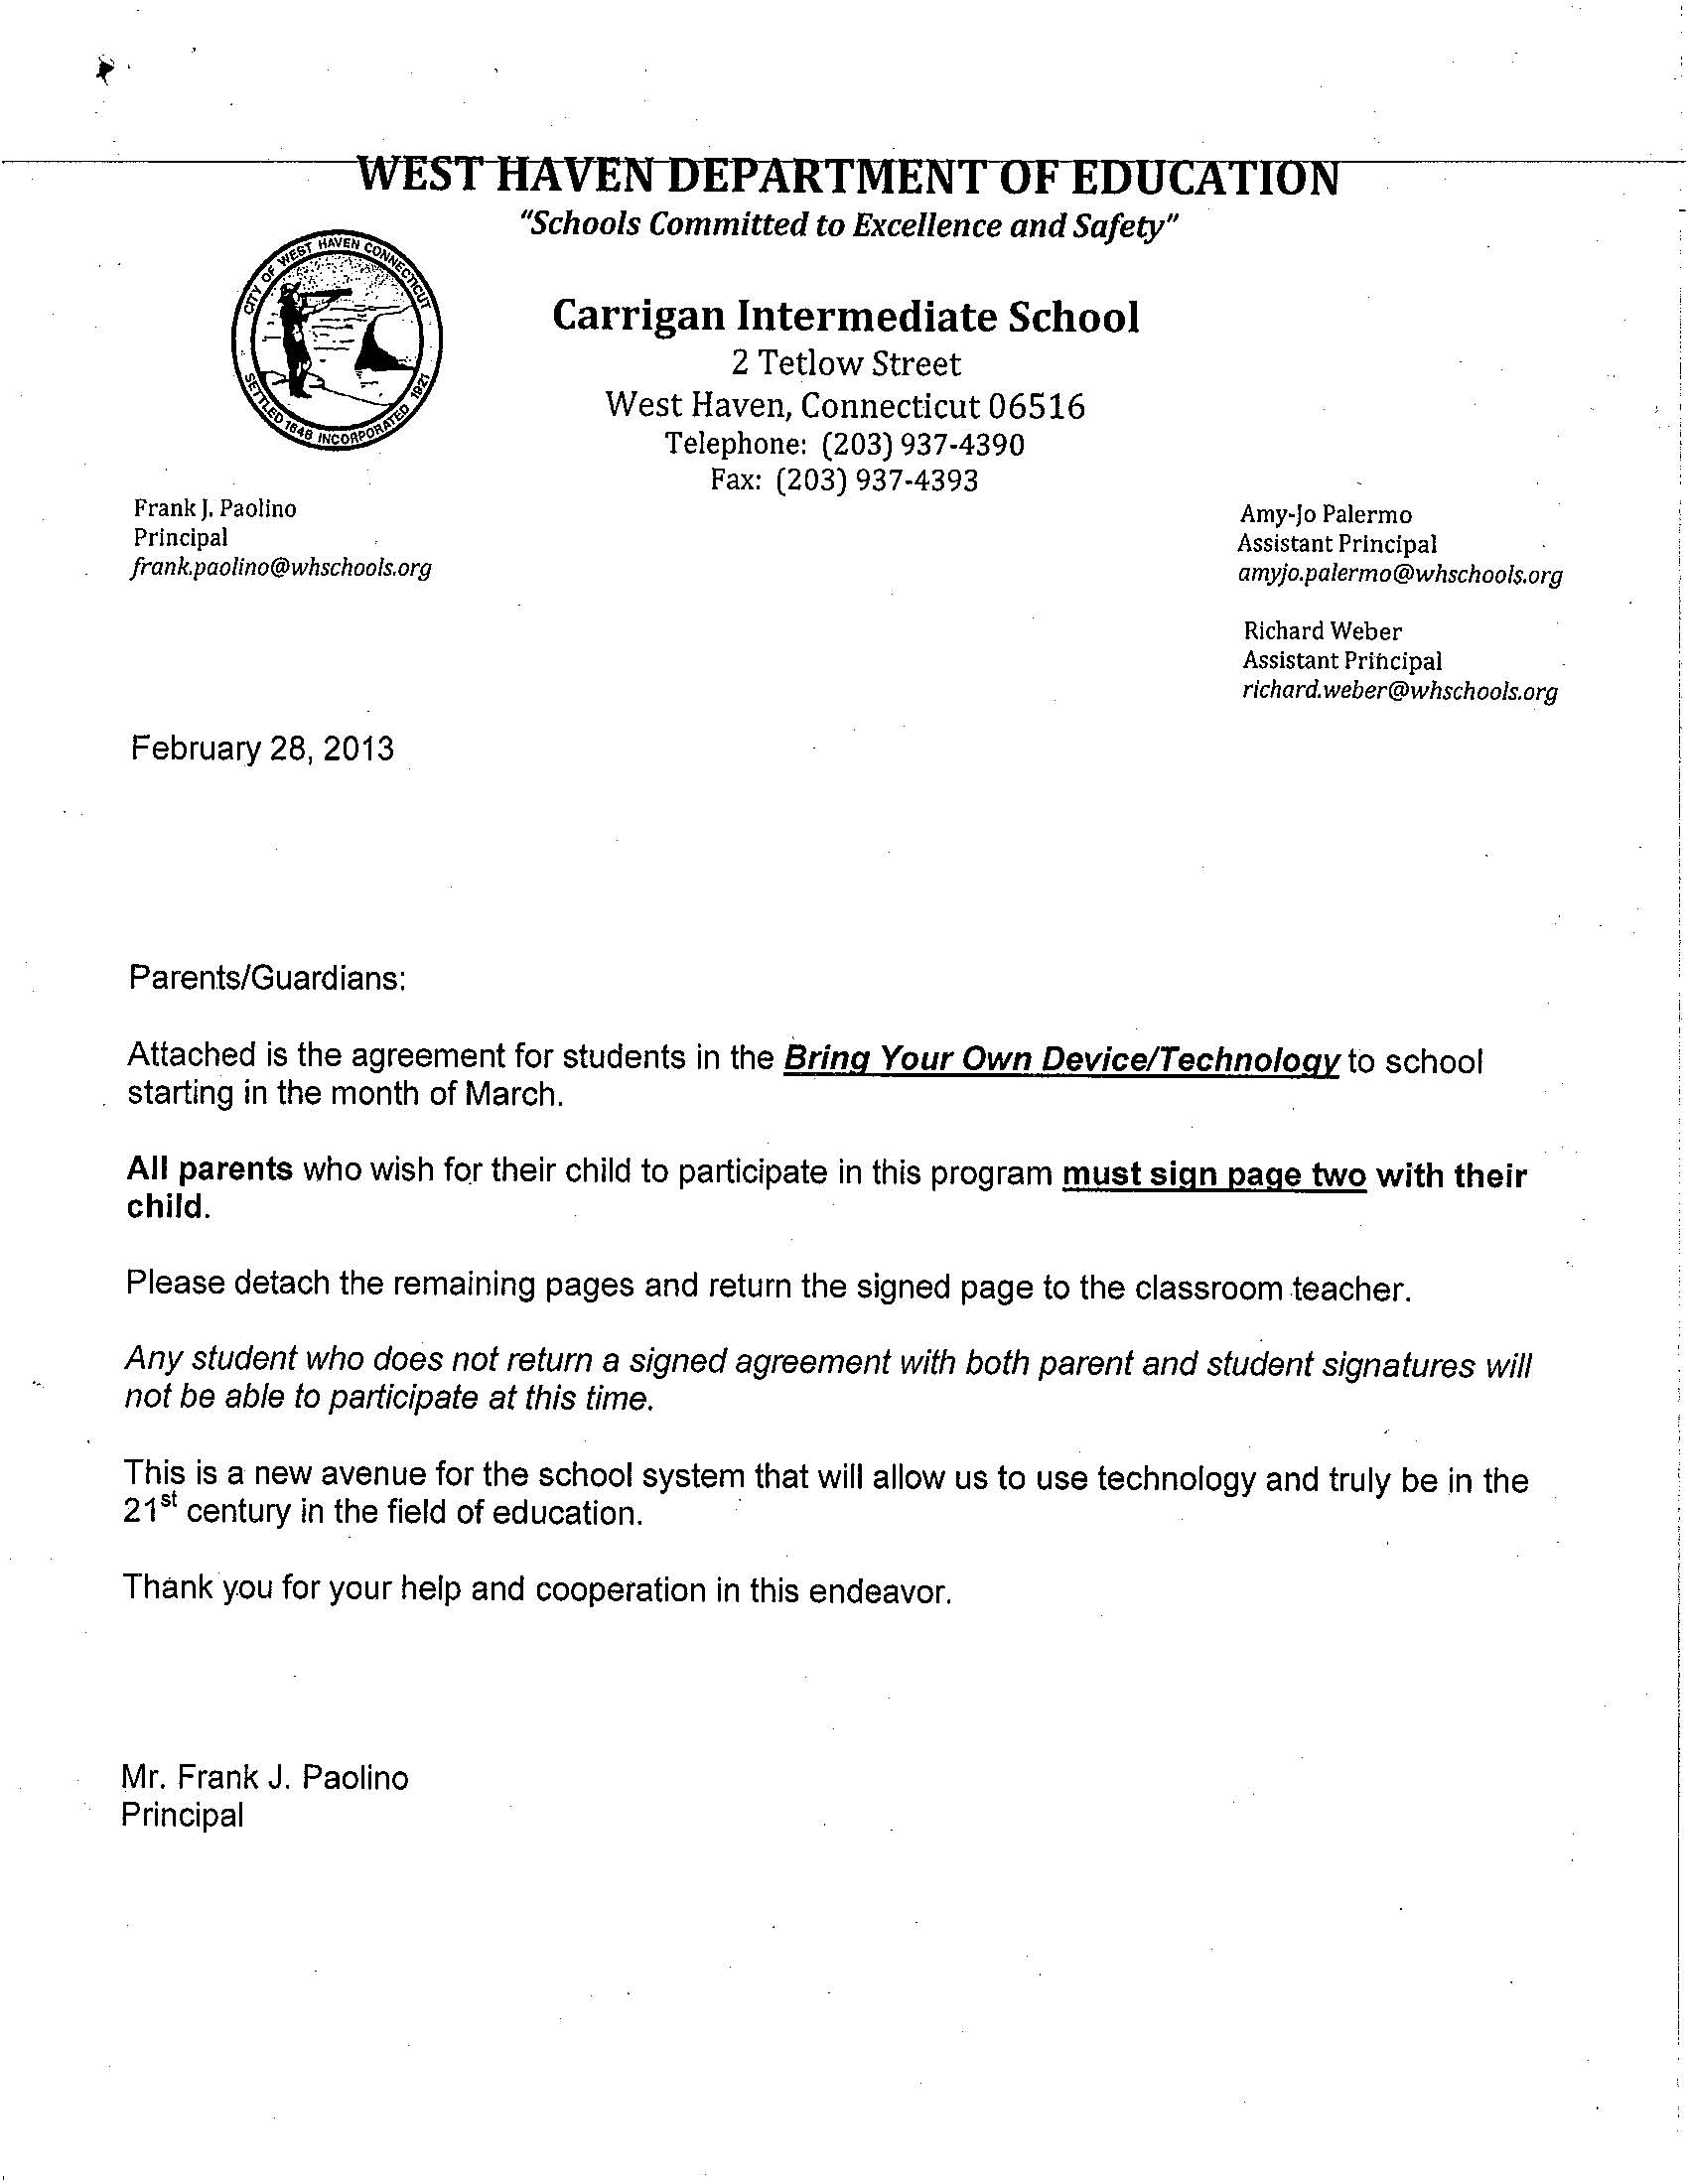 Byod Agreement Form Od Bring Your Own Device May V Carrigan Intermediate School